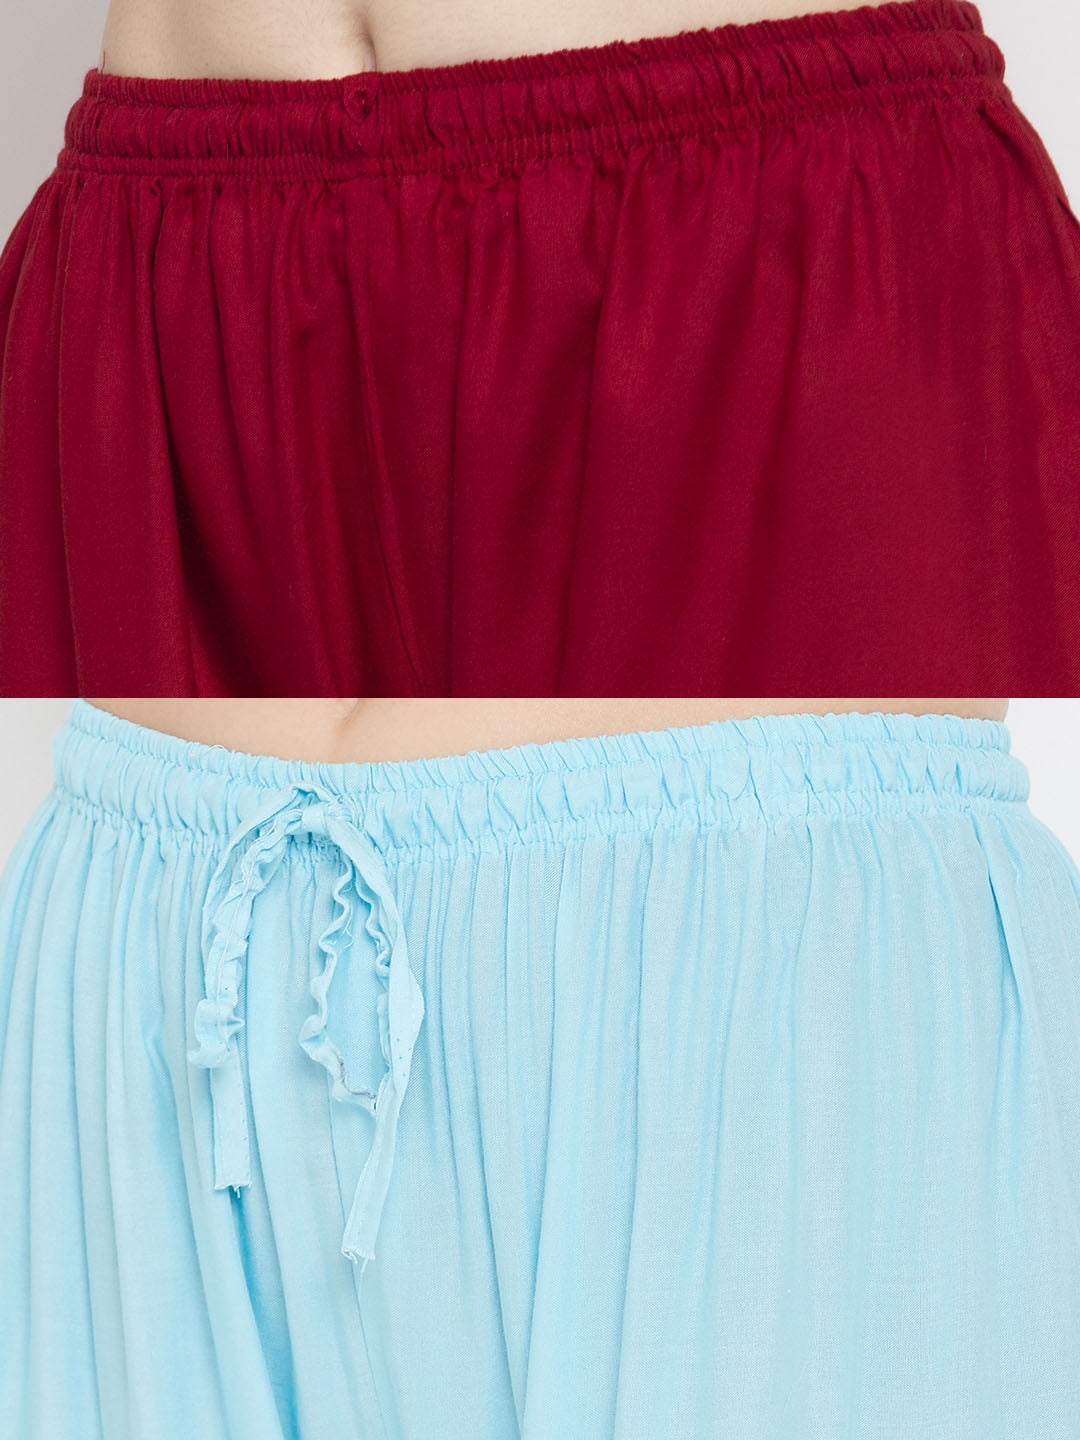 Clora Solid Maroon & Sky Blue Rayon Palazzo (Pack Of 2)